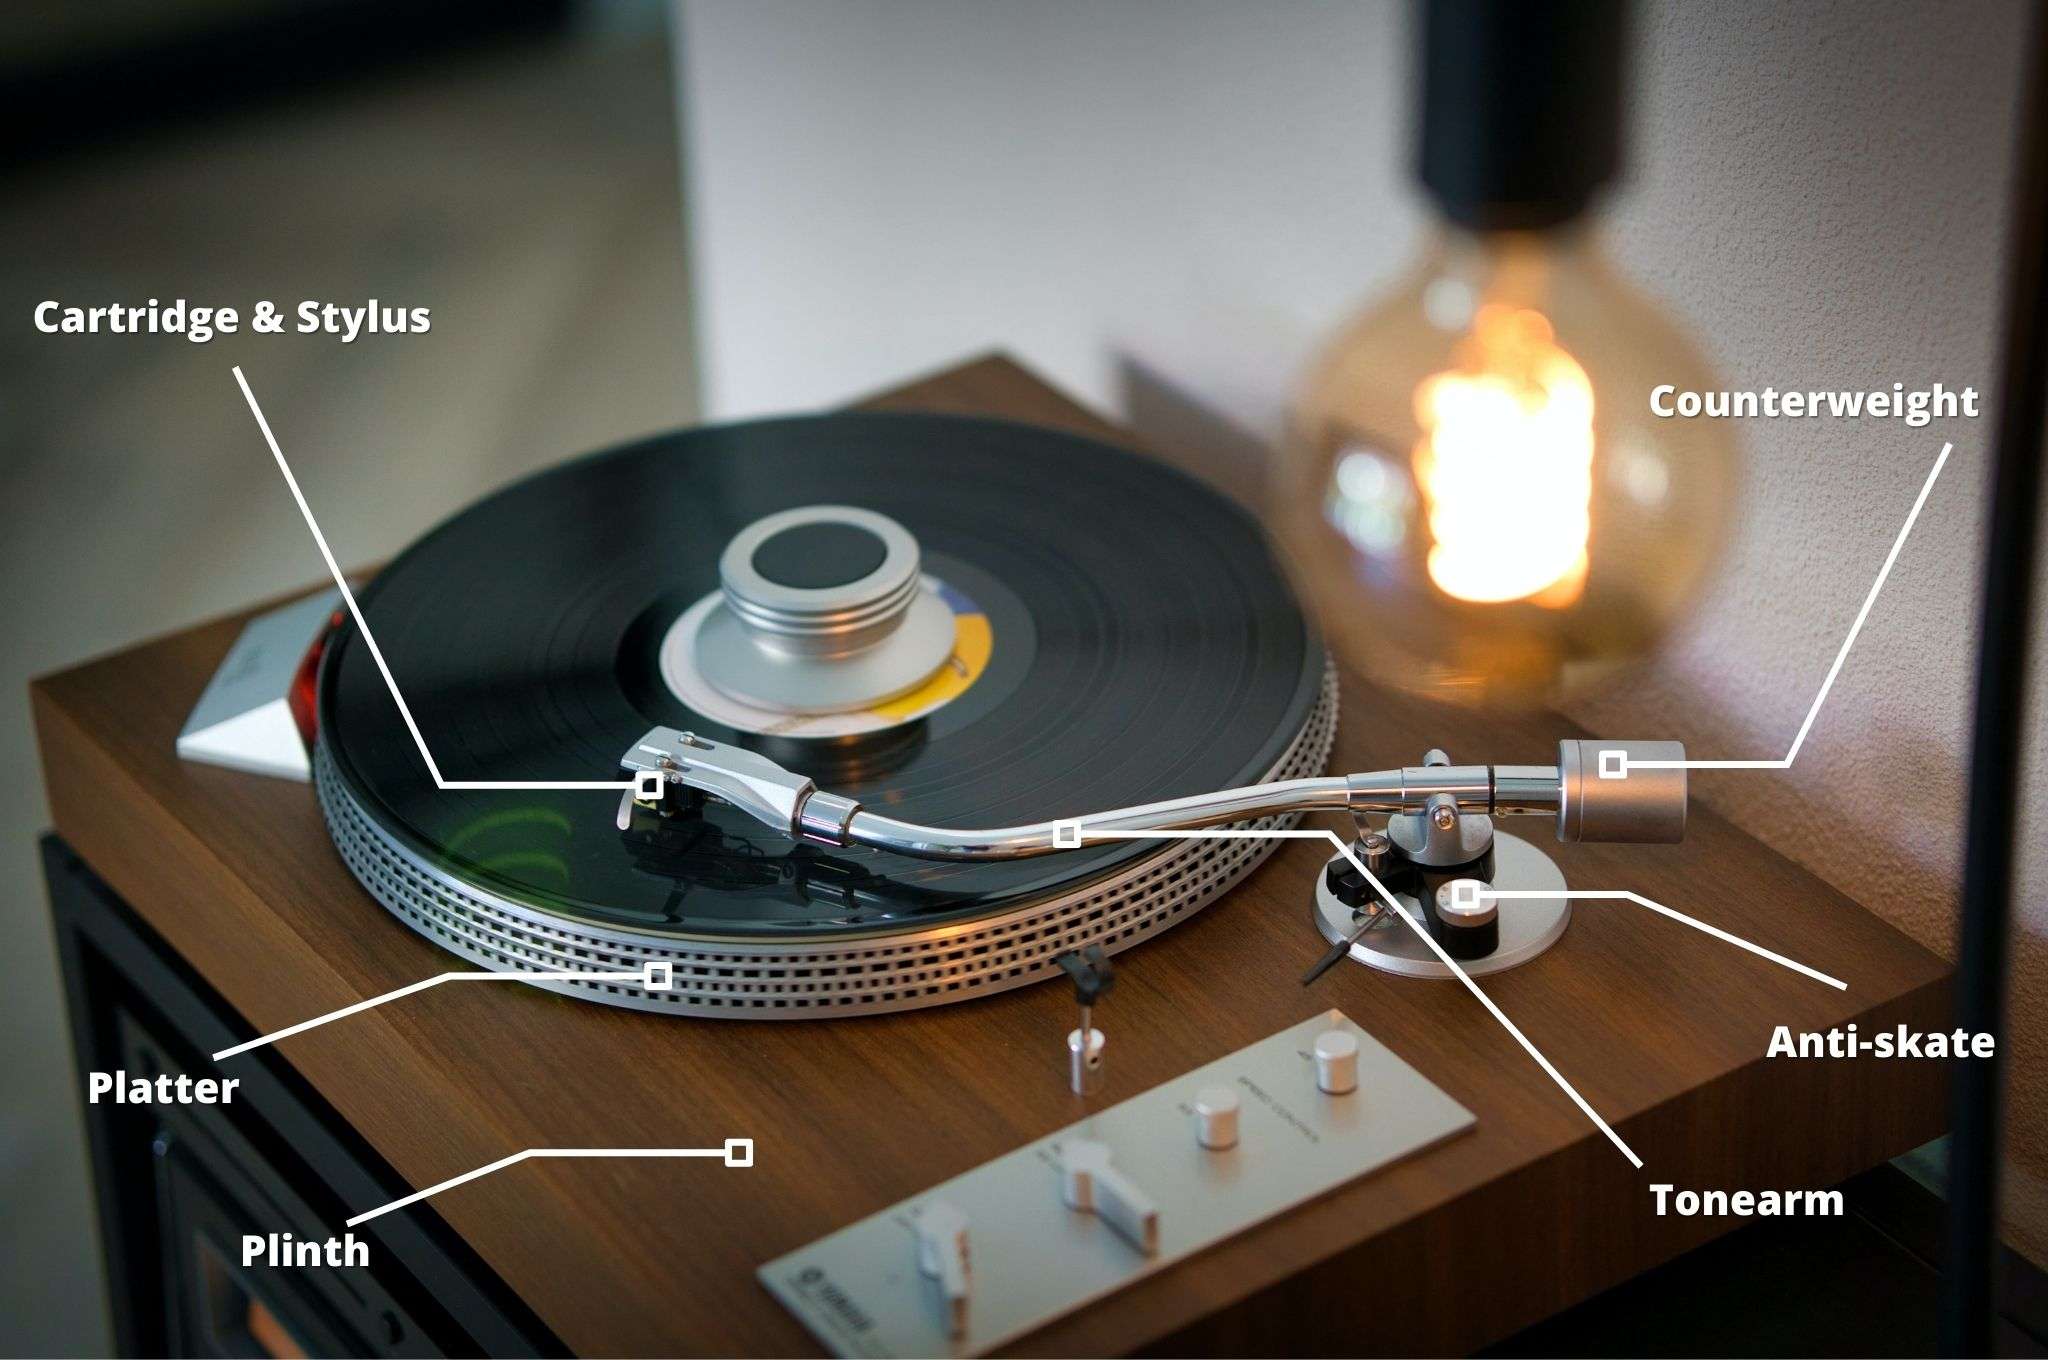 Diagram of the parts of a record player